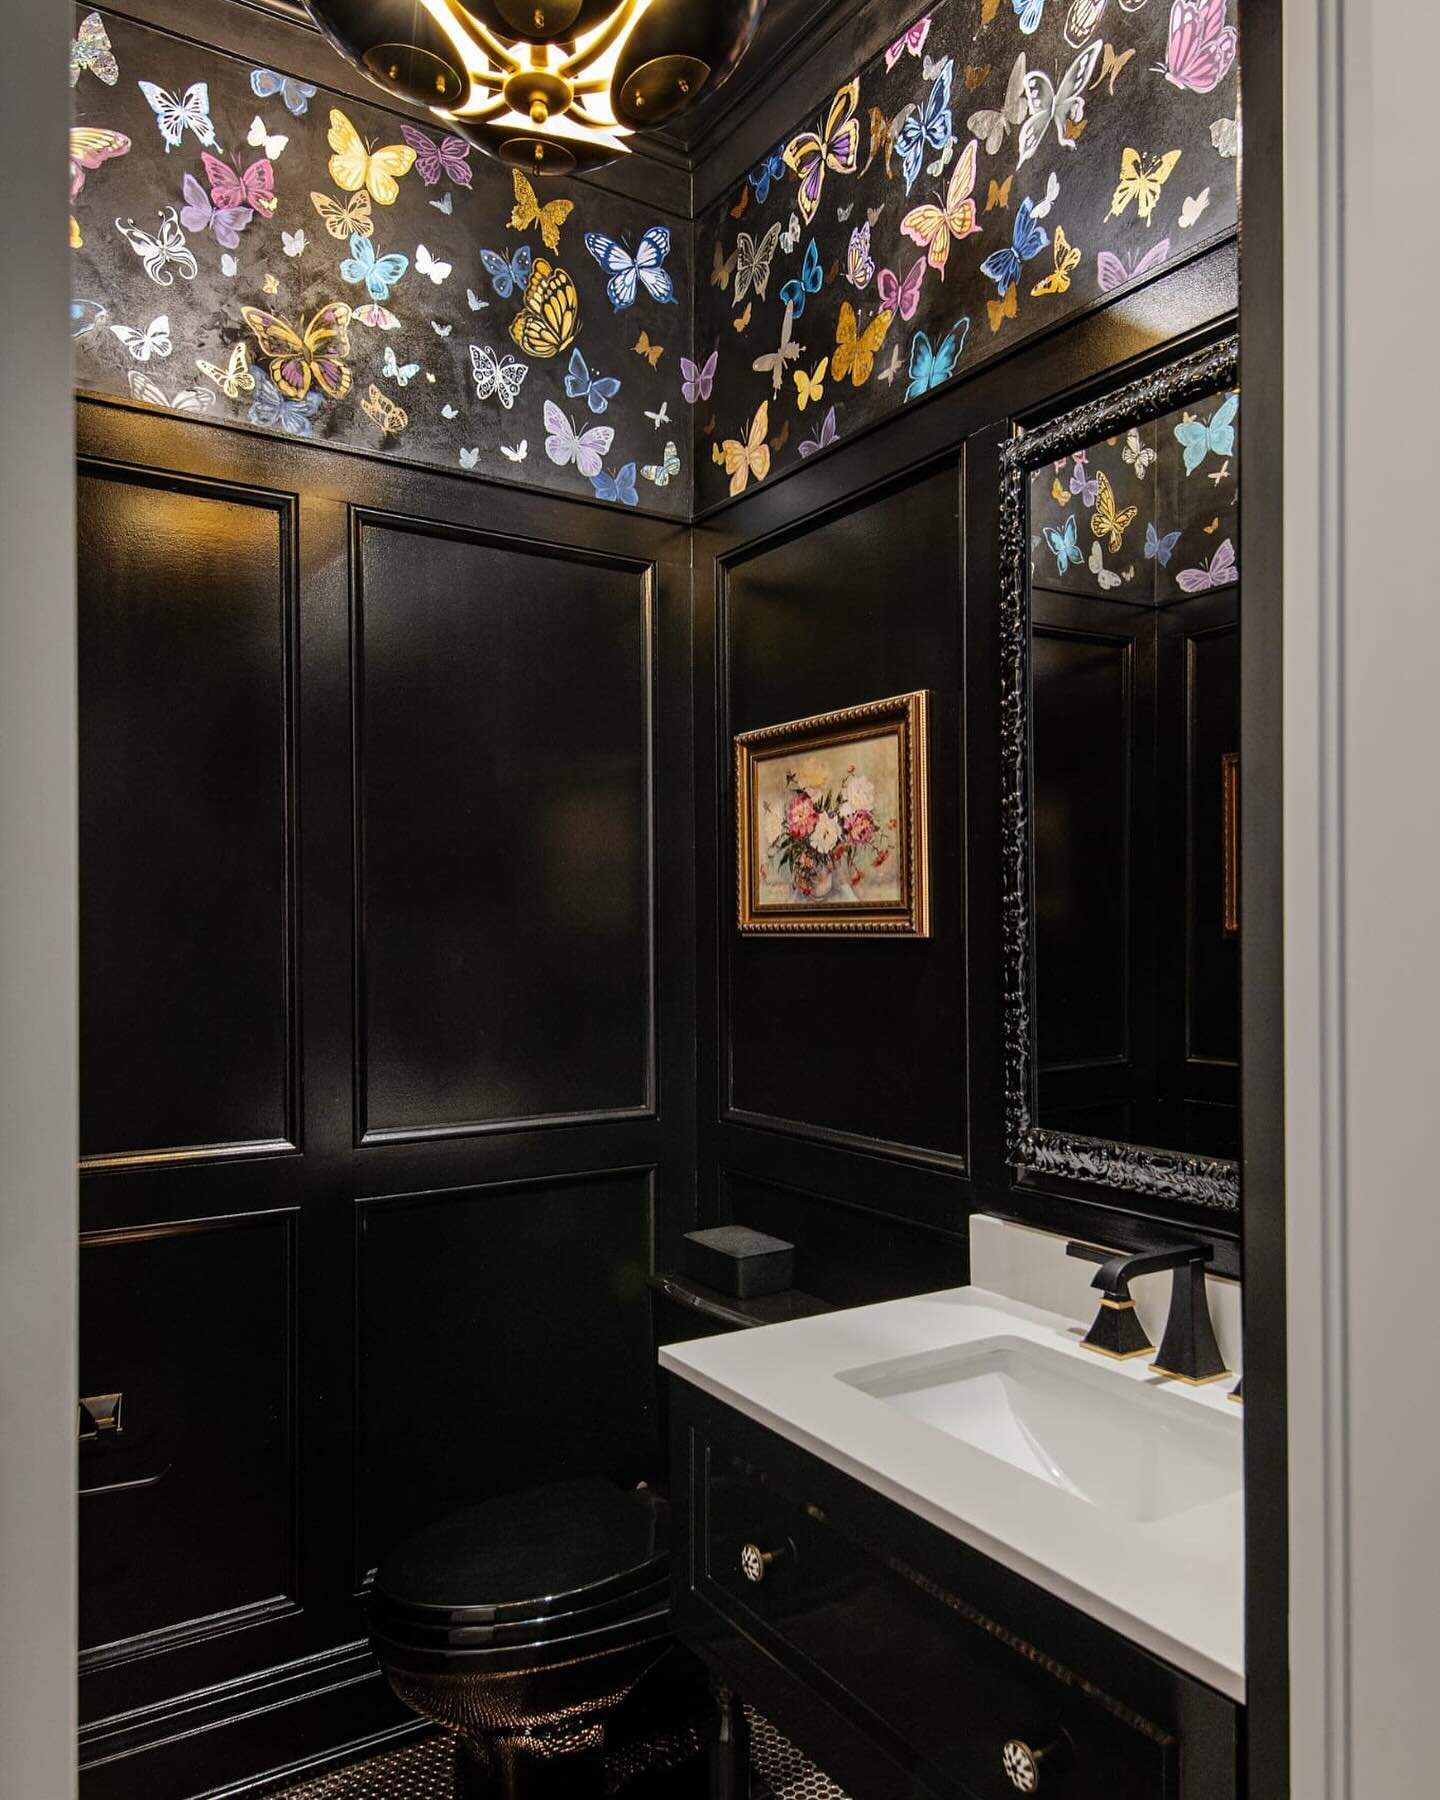 A JEWEL OF A POWDER ROOM 
The smallest room in the house is an opportunity to go big on fun and glam.
Black shimmering plaster with literally almost 200 hand painted and gilded butterflies.  Also included are mother of pearl veneer, abalone shell ven